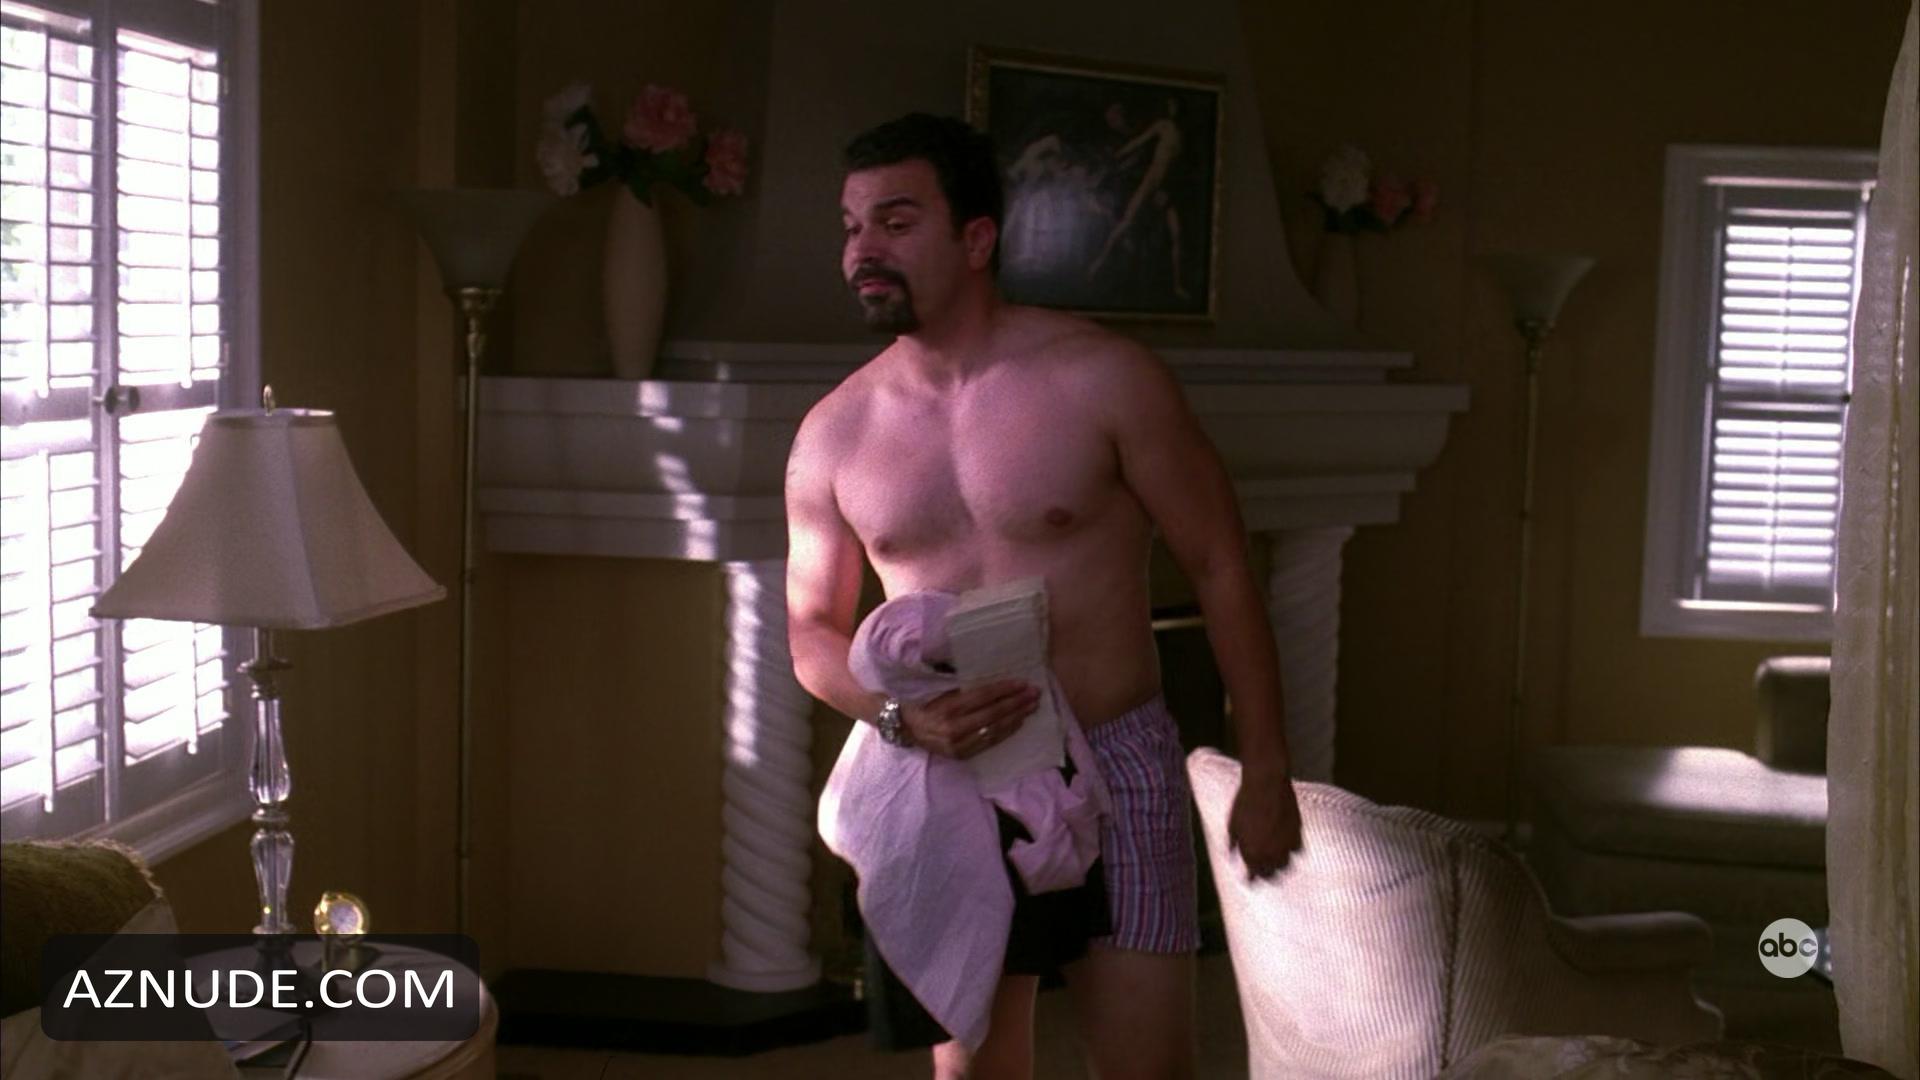 DESPERATE HOUSEWIVES NUDE SCENES photo